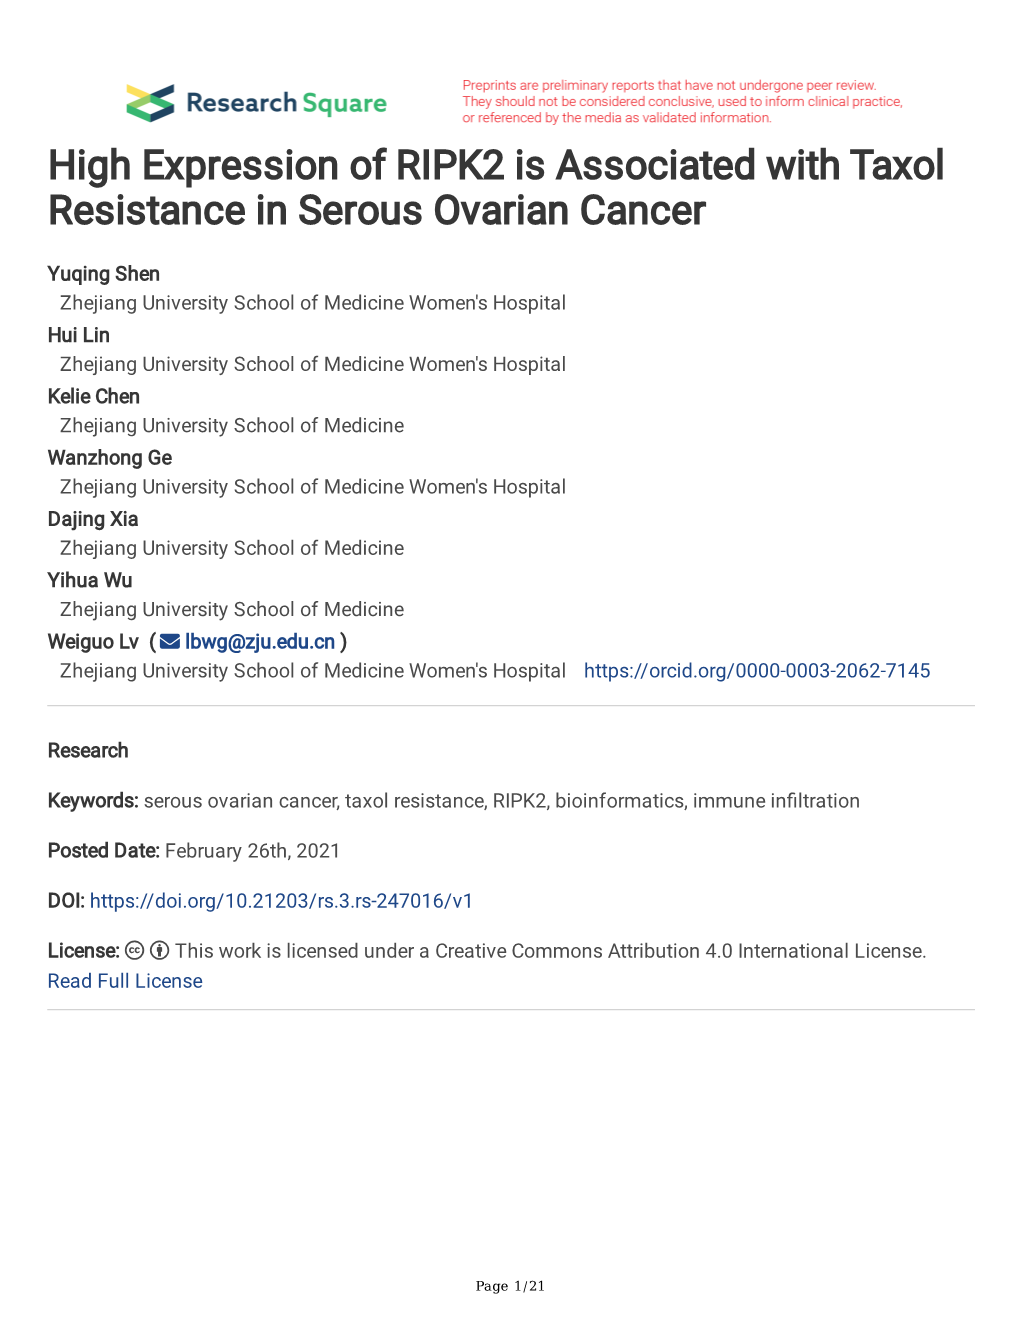 High Expression of RIPK2 Is Associated with Taxol Resistance in Serous Ovarian Cancer